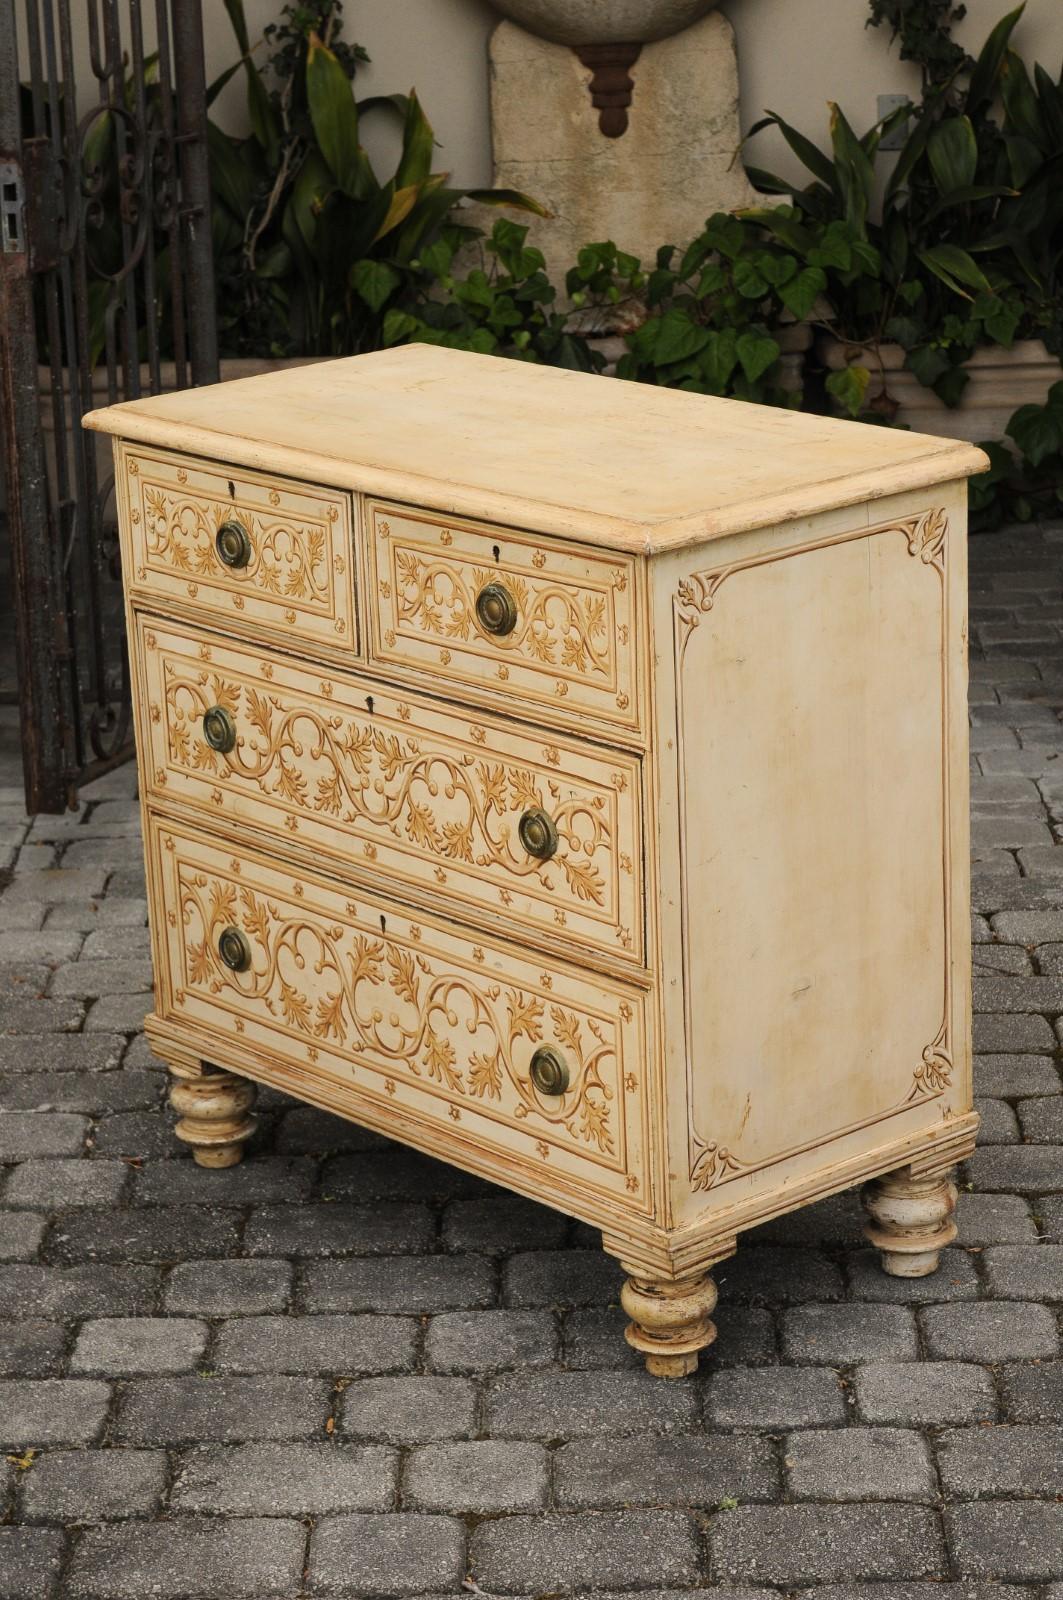 English Painted Wood Four-Drawer Commode with Scrollwork Motifs, circa 1880 In Good Condition For Sale In Atlanta, GA